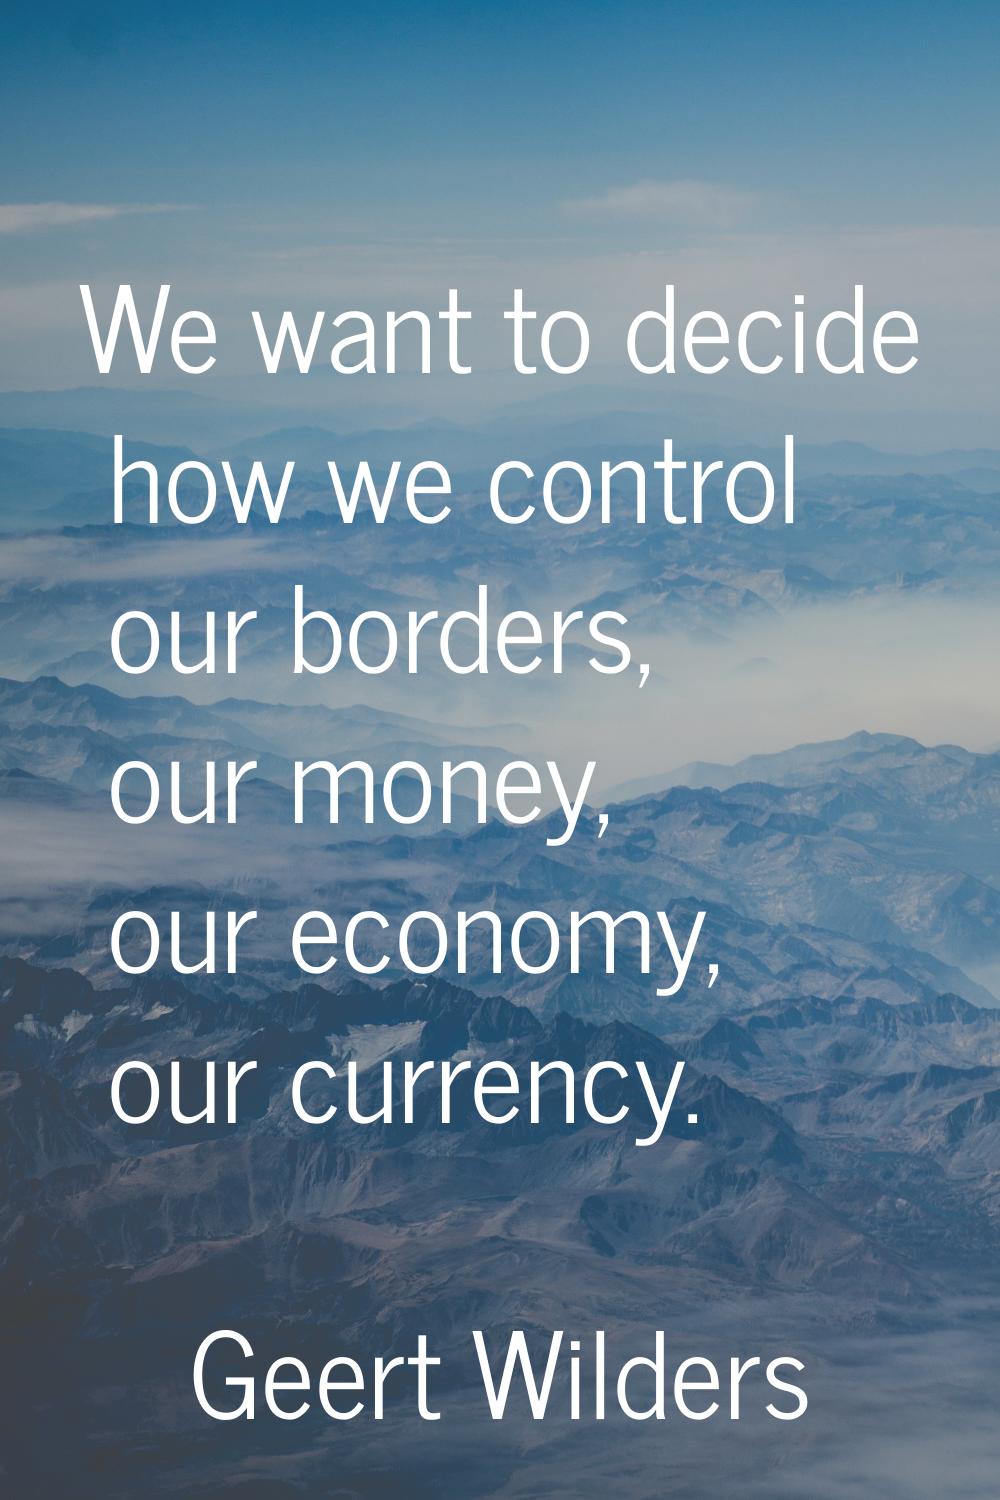 We want to decide how we control our borders, our money, our economy, our currency.